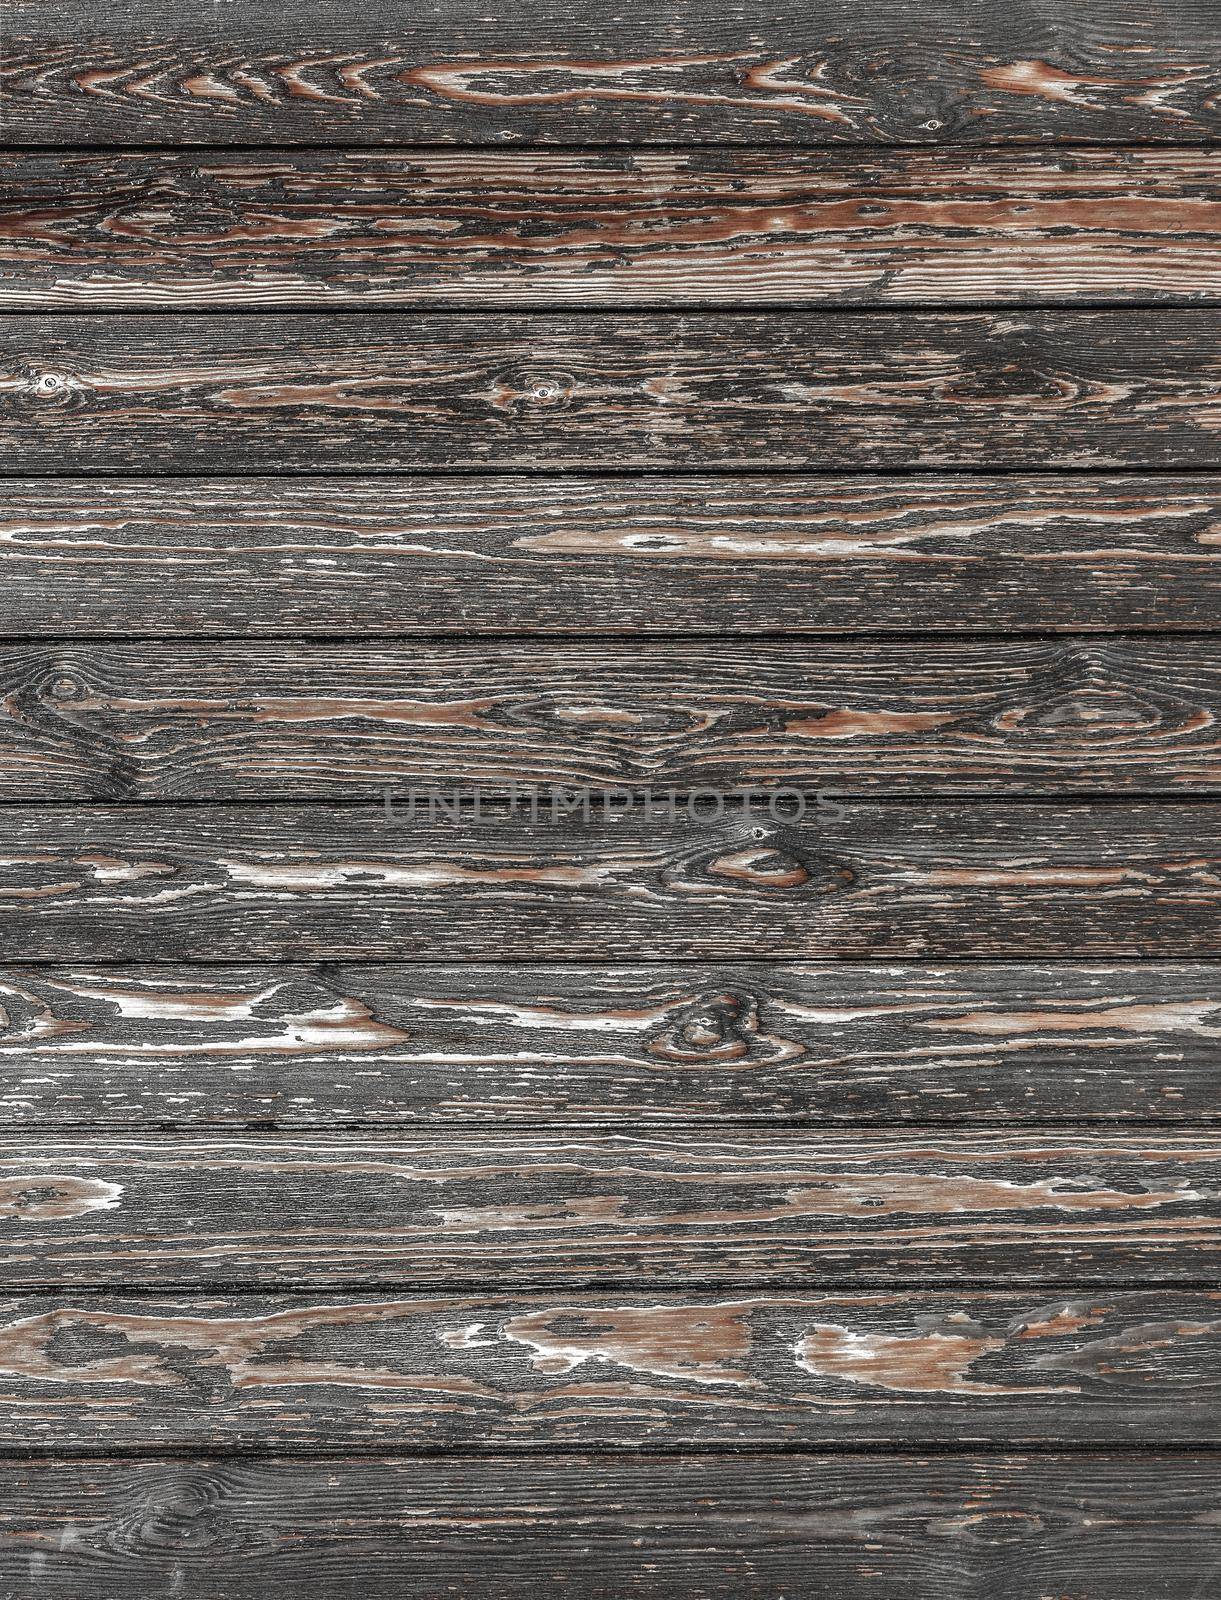 Old vintage and rustic wooden background. Wooden table or floor.